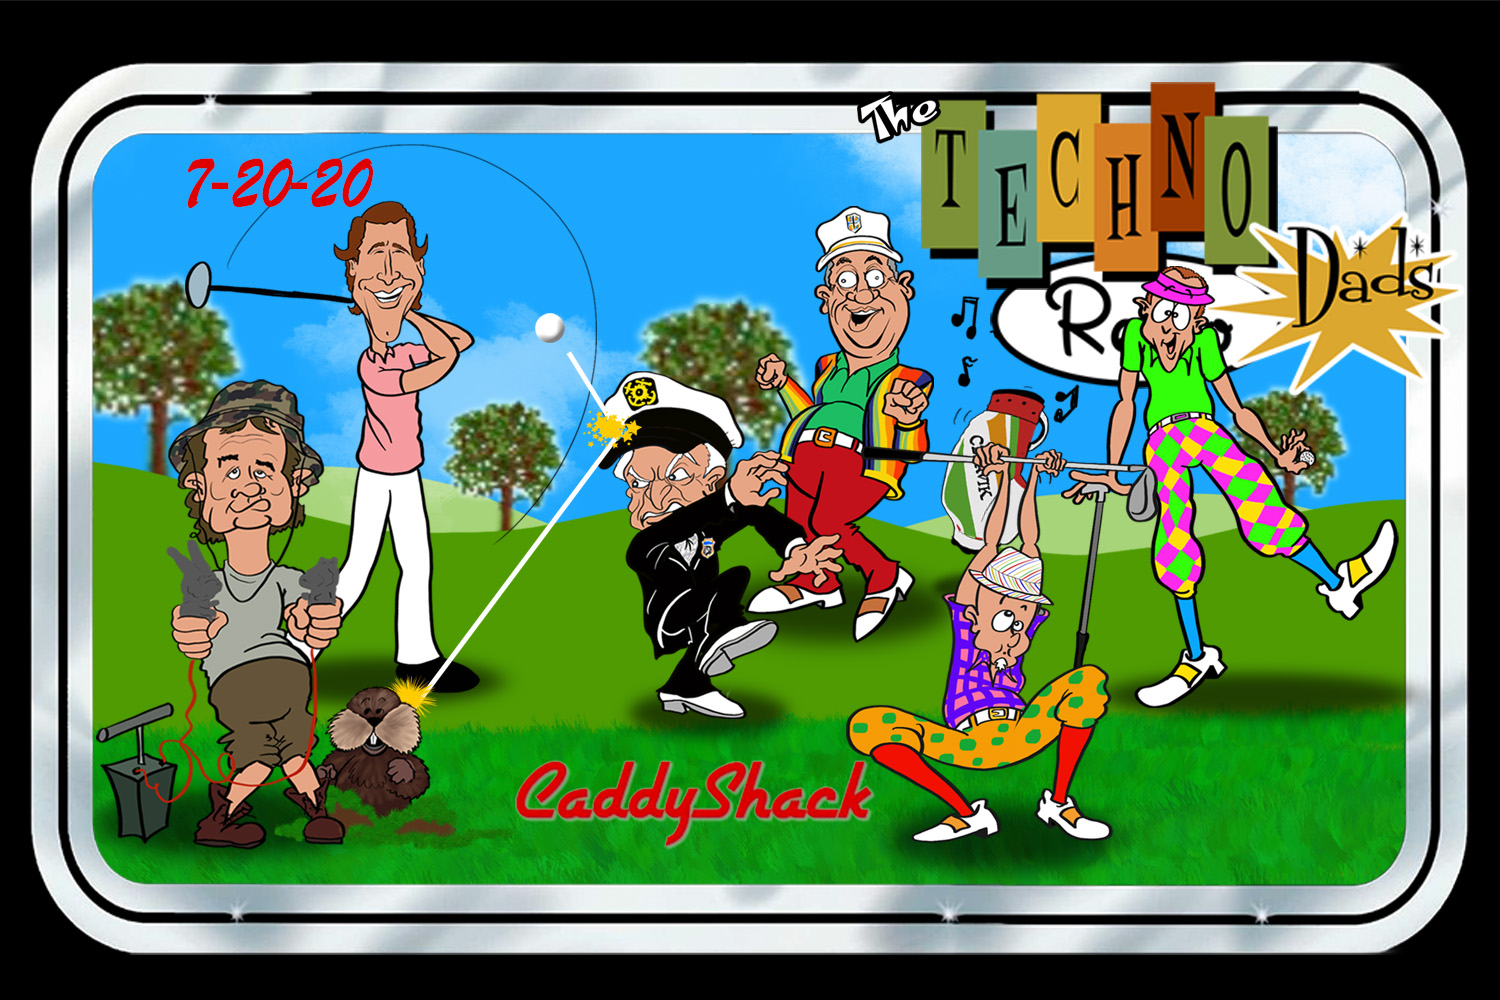 TechnoRetro Dads: FORE!-Tee years of Caddyshack